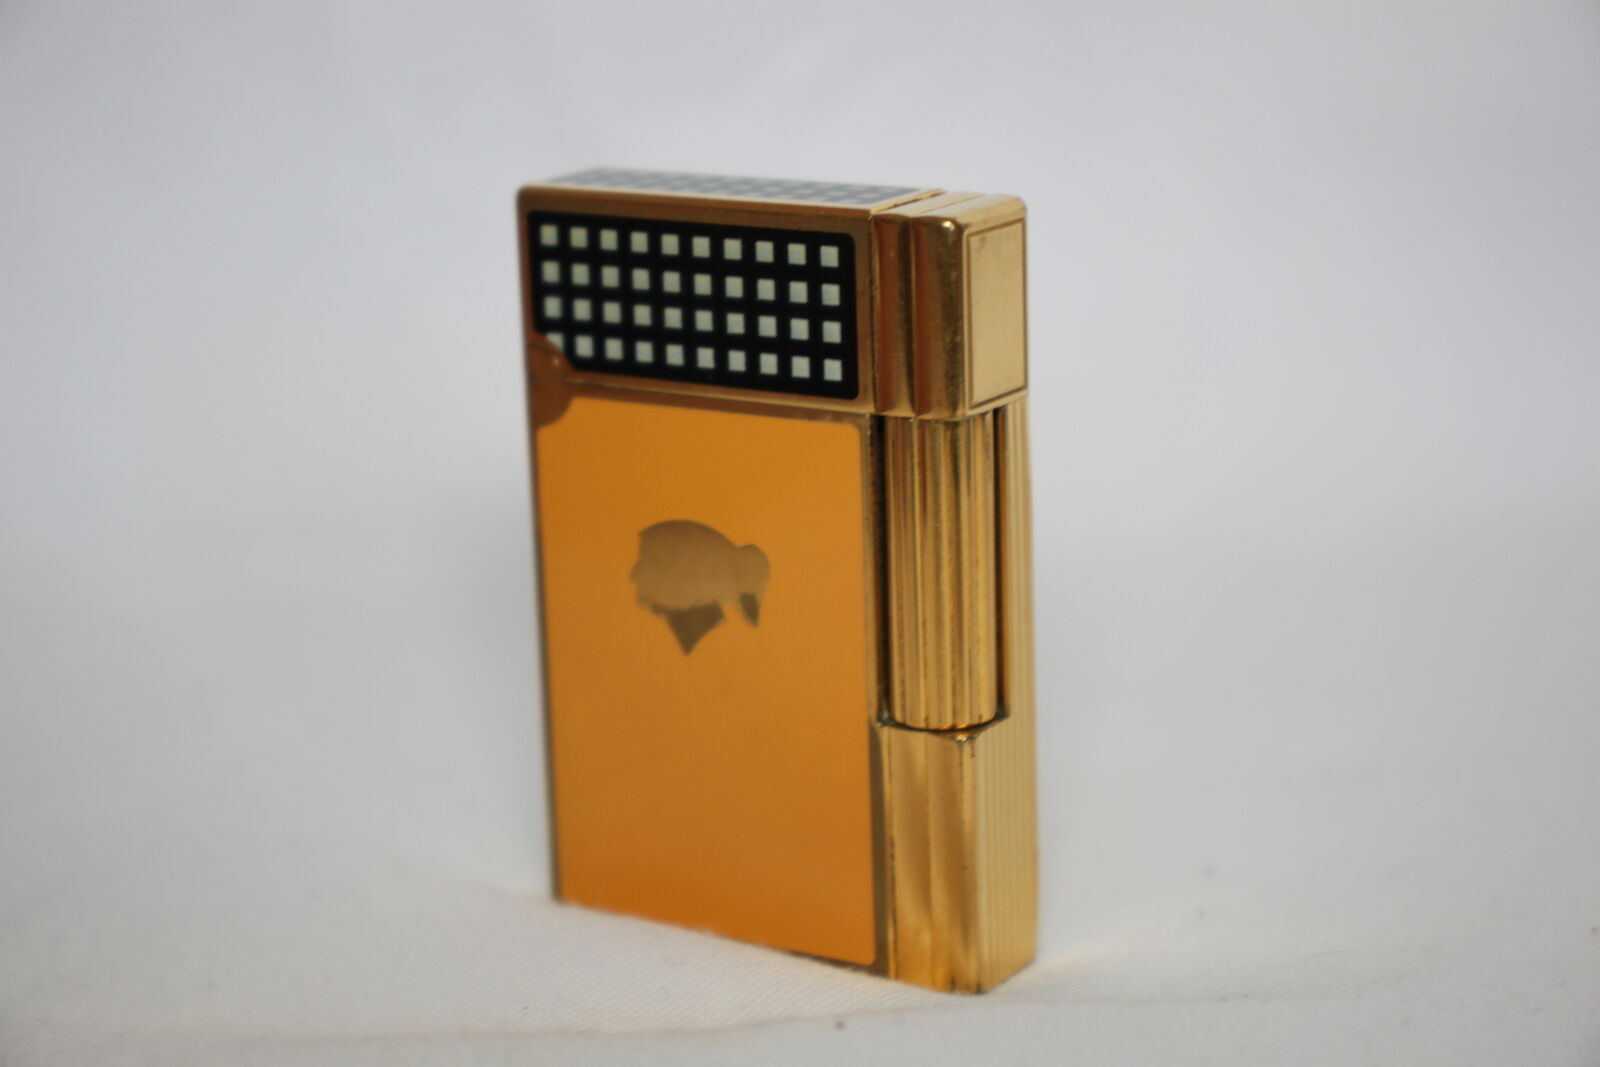 S.T.Dupont Cohiba Limited Edition Gatsby Lighter without the box - $2,350.00